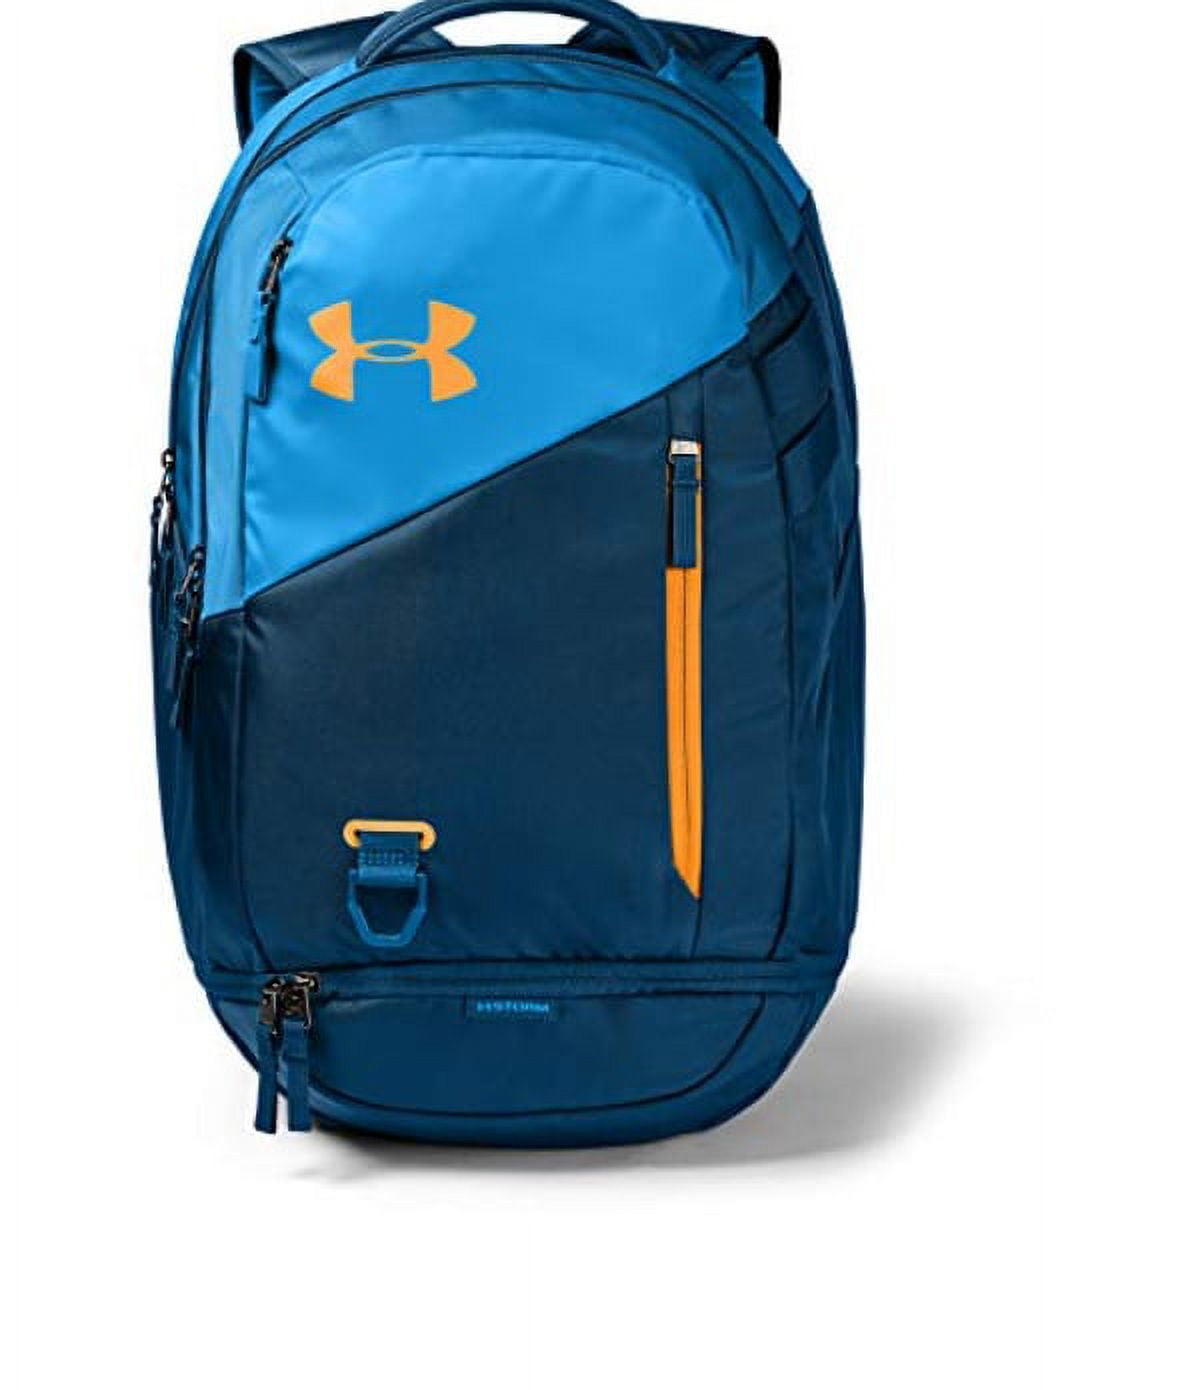 Under Armour 1342651 Adult Hustle 4.0 Backpack Blue/Golden Yellow